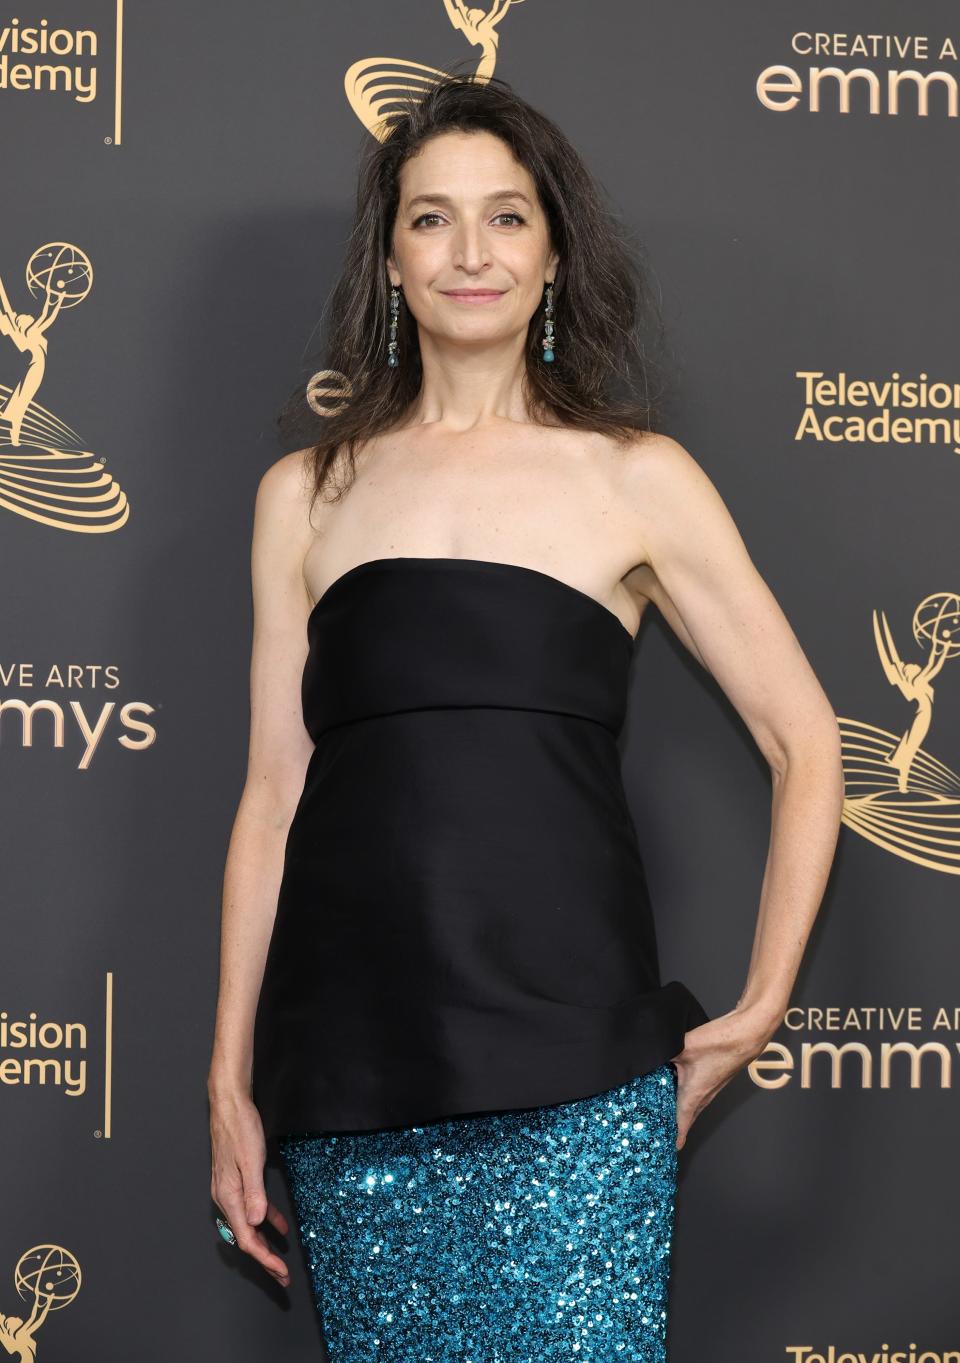 Meredith Tucker attends the 2022 Creative Arts Emmys at Microsoft Theater on Sept. 4, 2022, in Los Angeles.